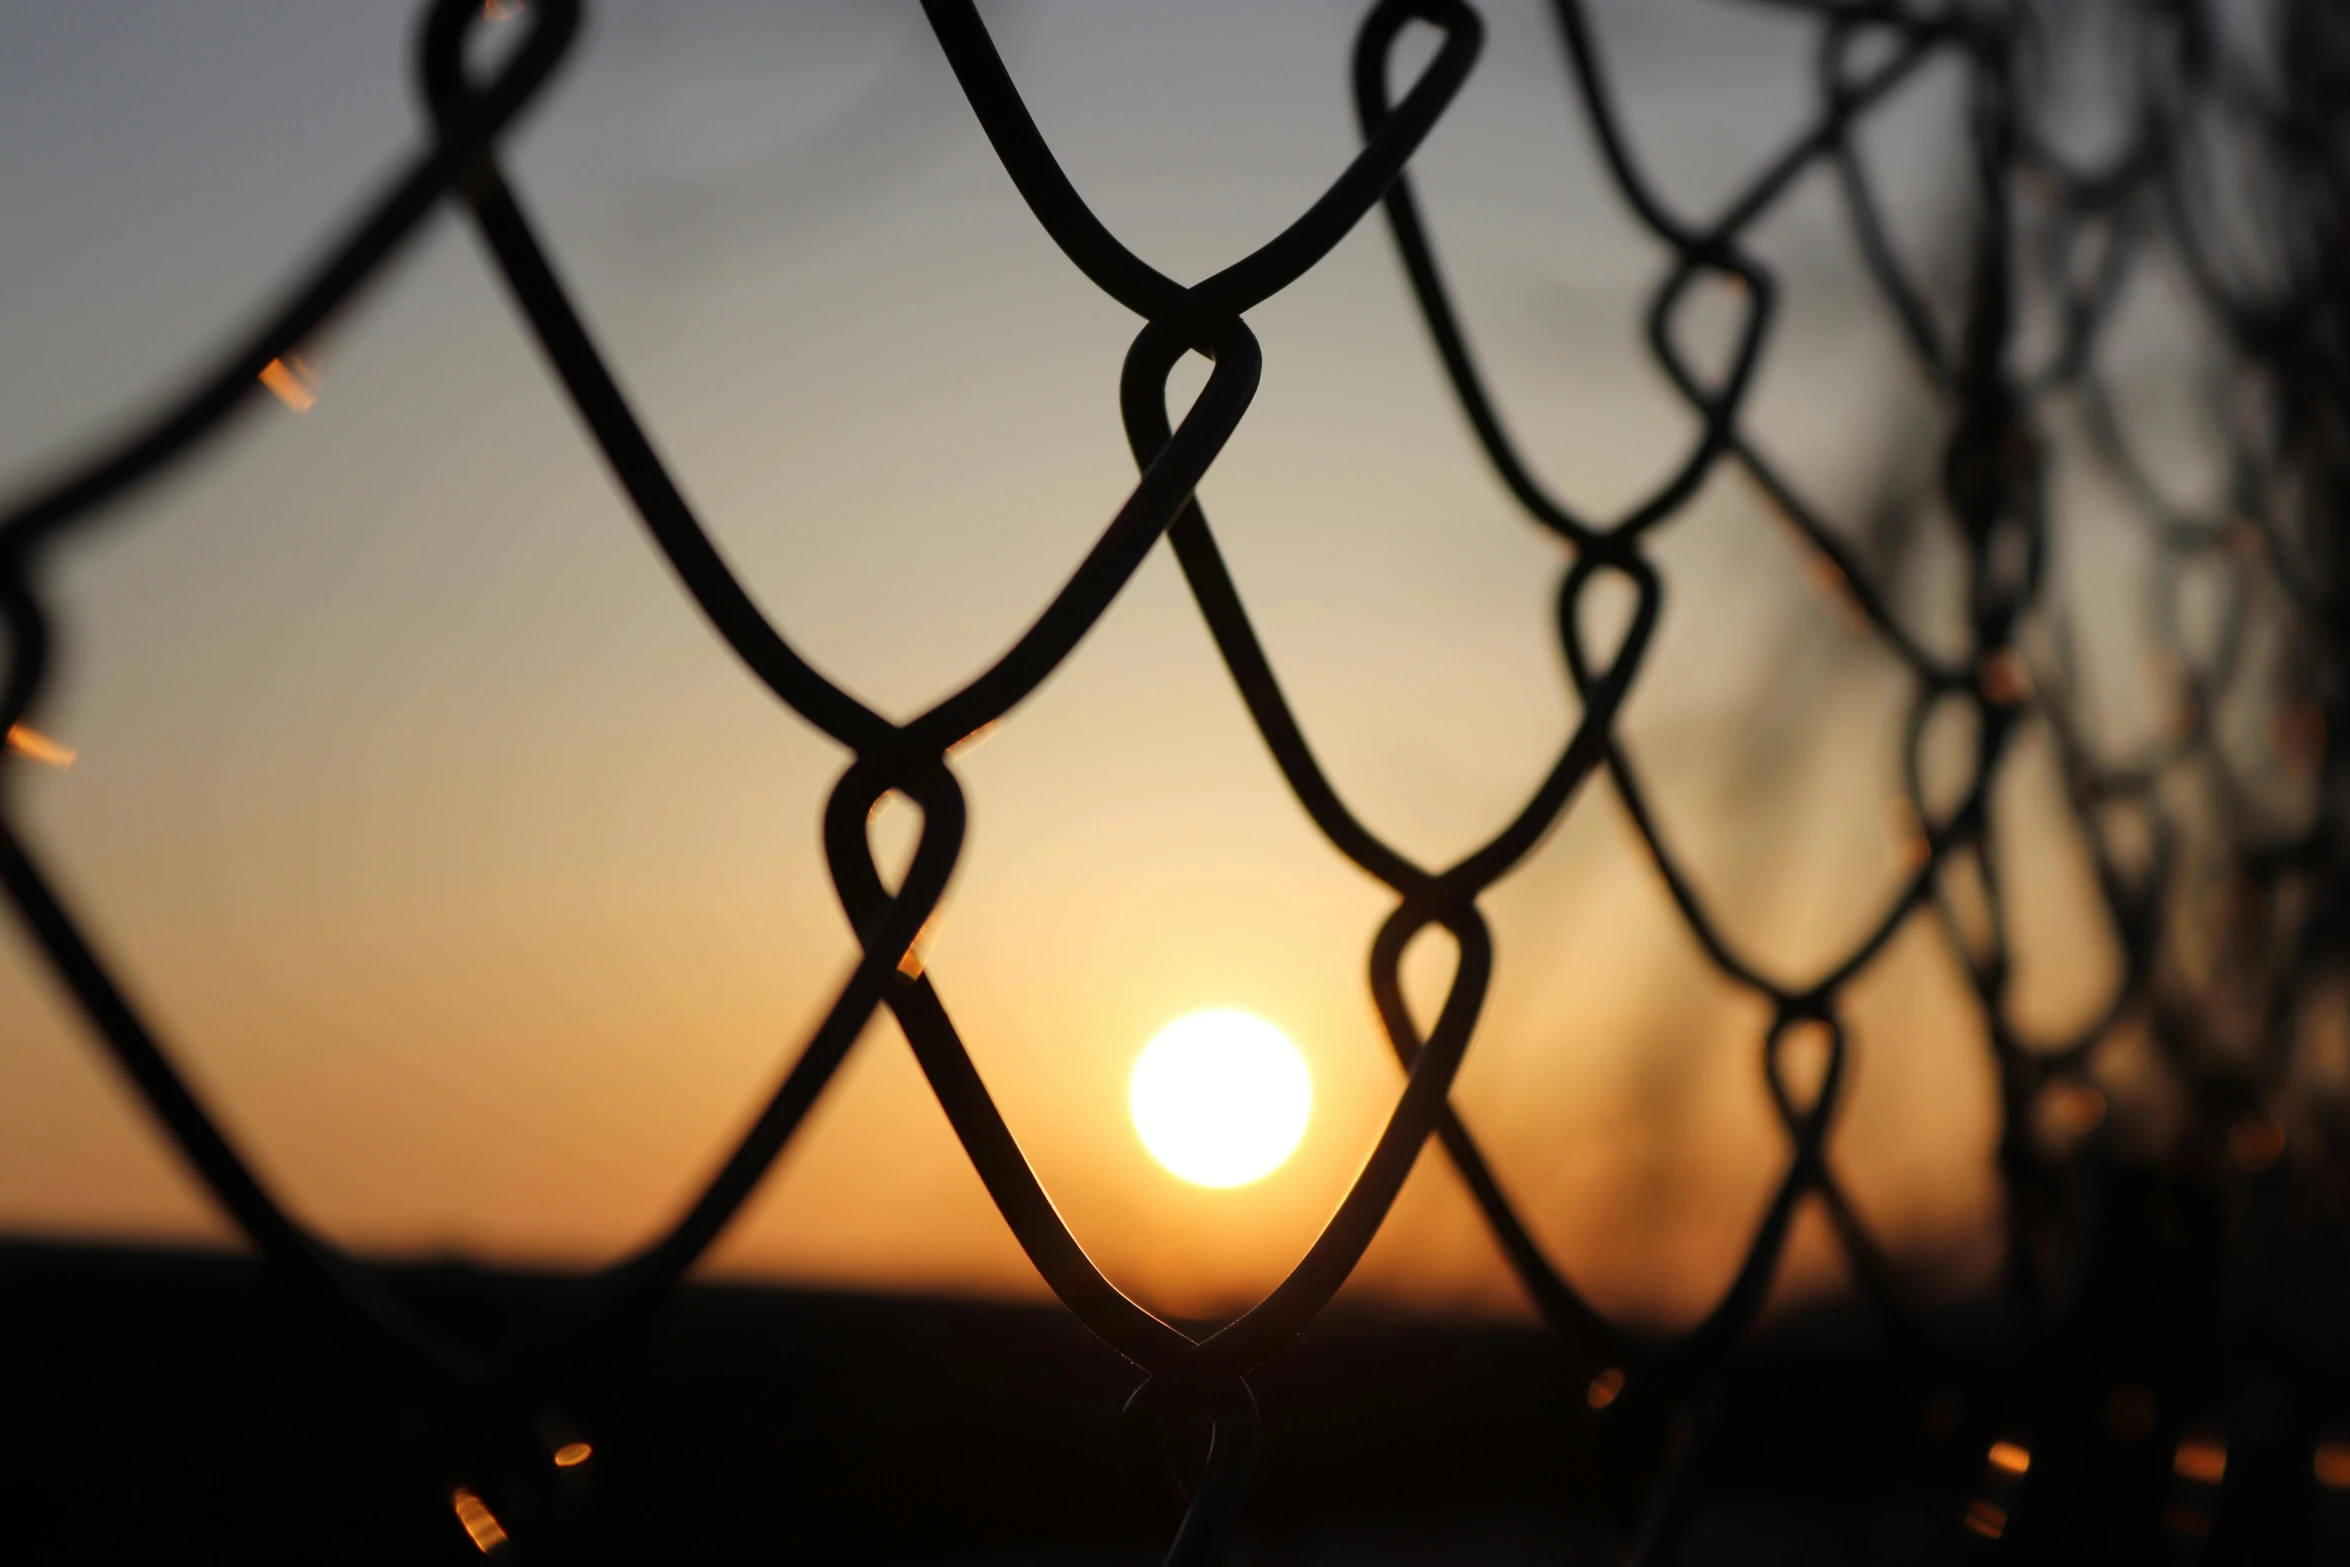 a chain link fence with a sunset in the background